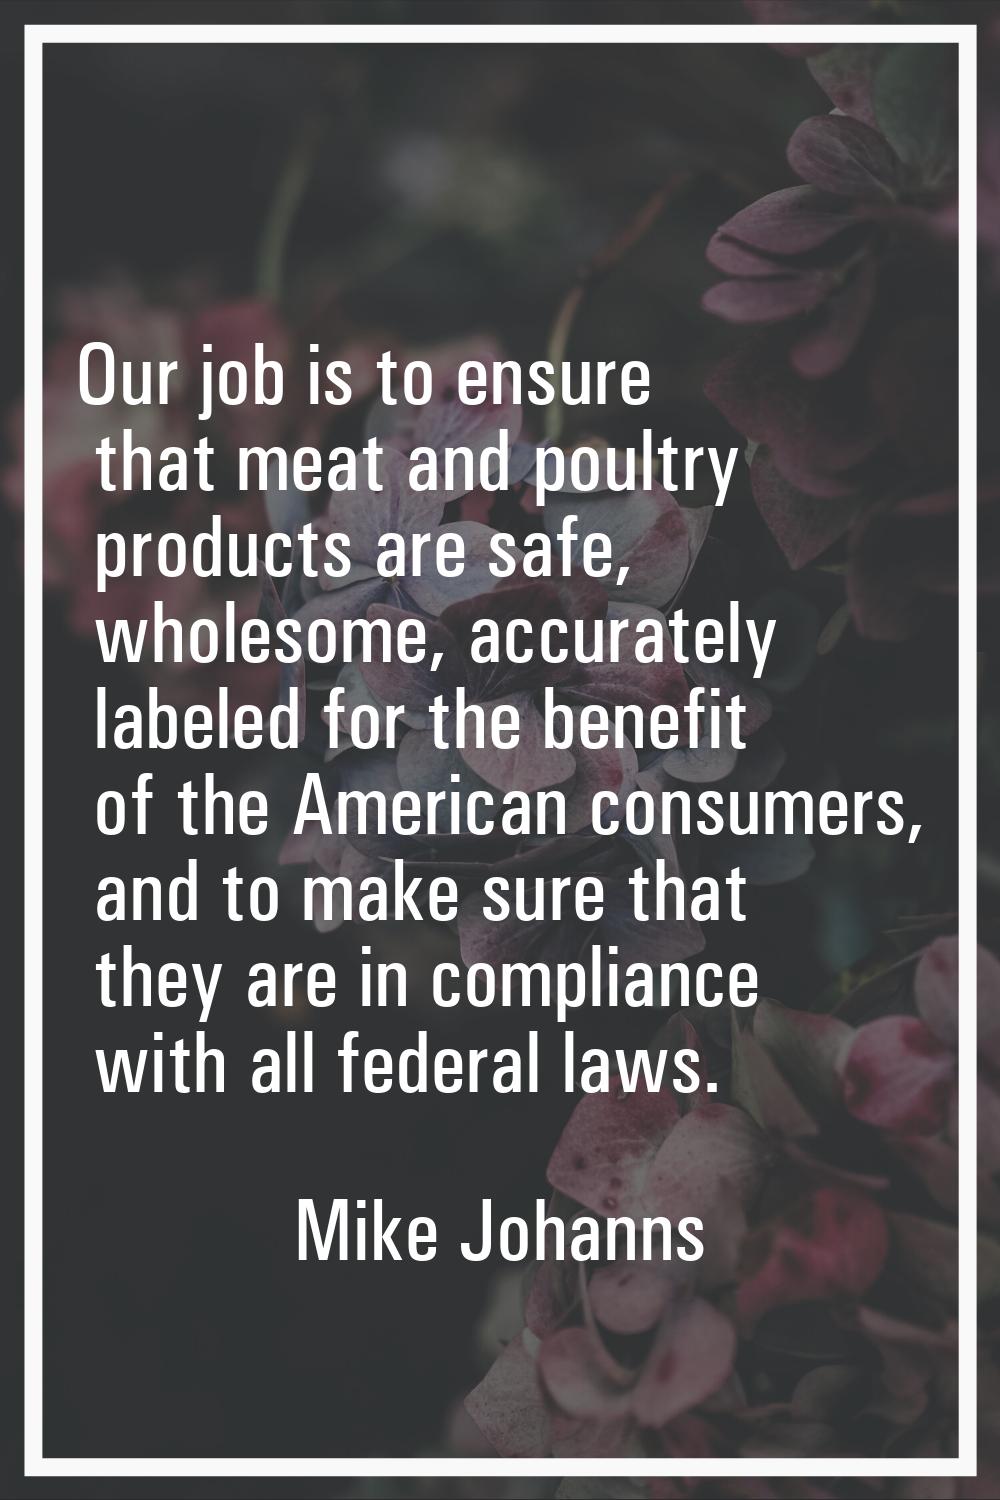 Our job is to ensure that meat and poultry products are safe, wholesome, accurately labeled for the